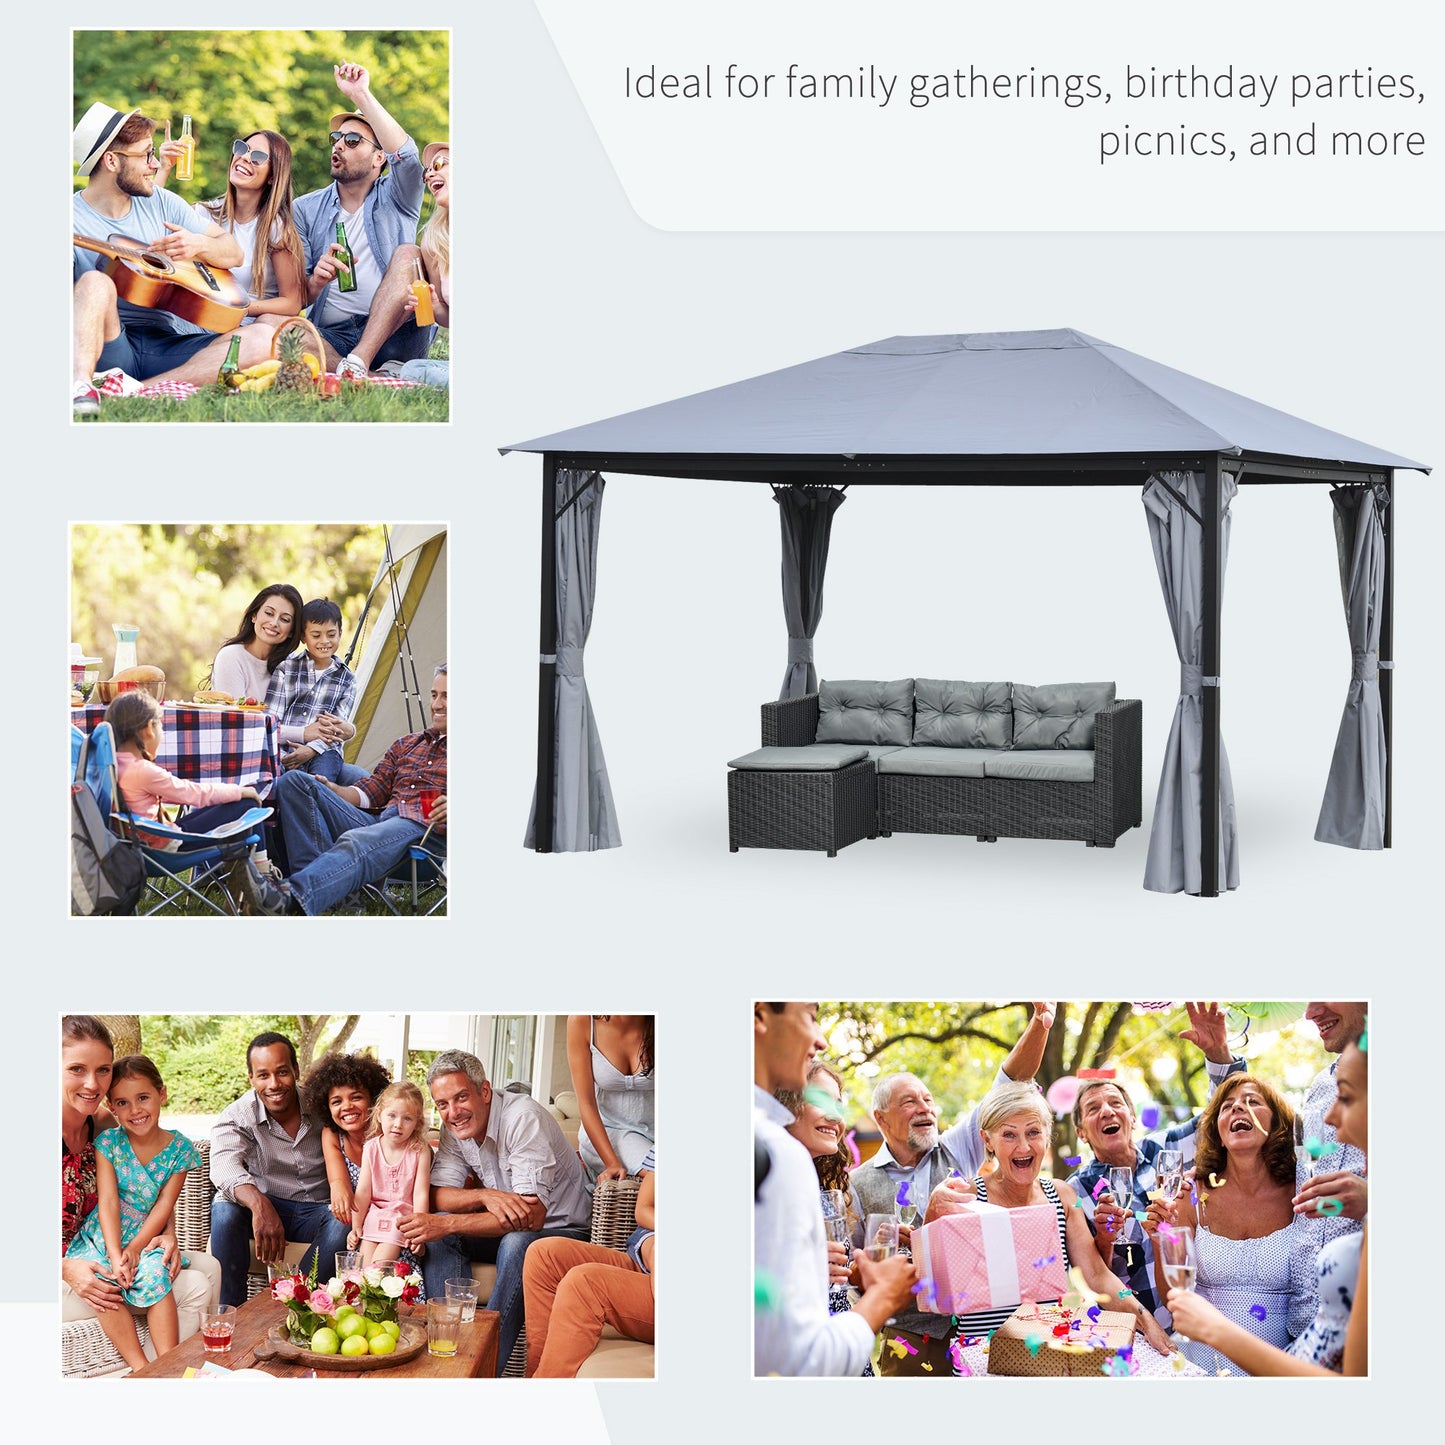 Outsunny 4 x 3(m) Outdoor Gazebo Canopy Party Tent Garden Pavilion Patio Shelter with Curtains, Netting Sidewalls, Grey w/